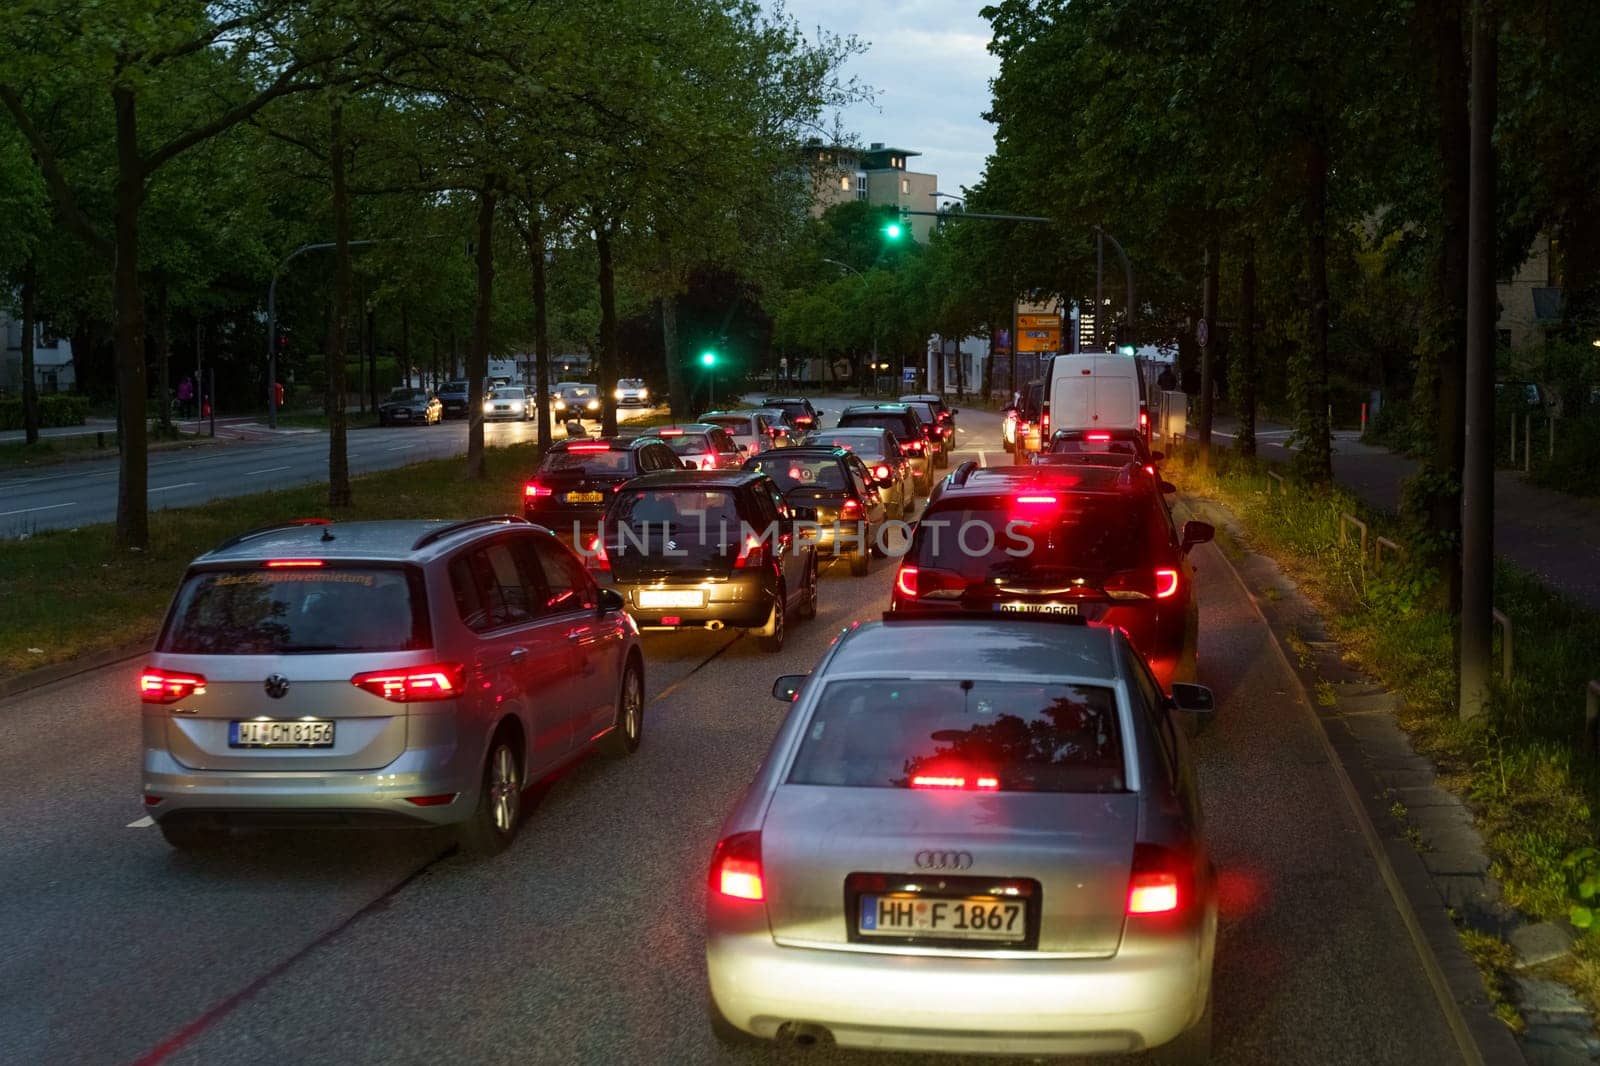 Hamburg, Germany - May 19, 2023: Vehicles line up at a traffic light on a city street during twilight, with the glow of red tail lights and street lamps illuminating the scene.